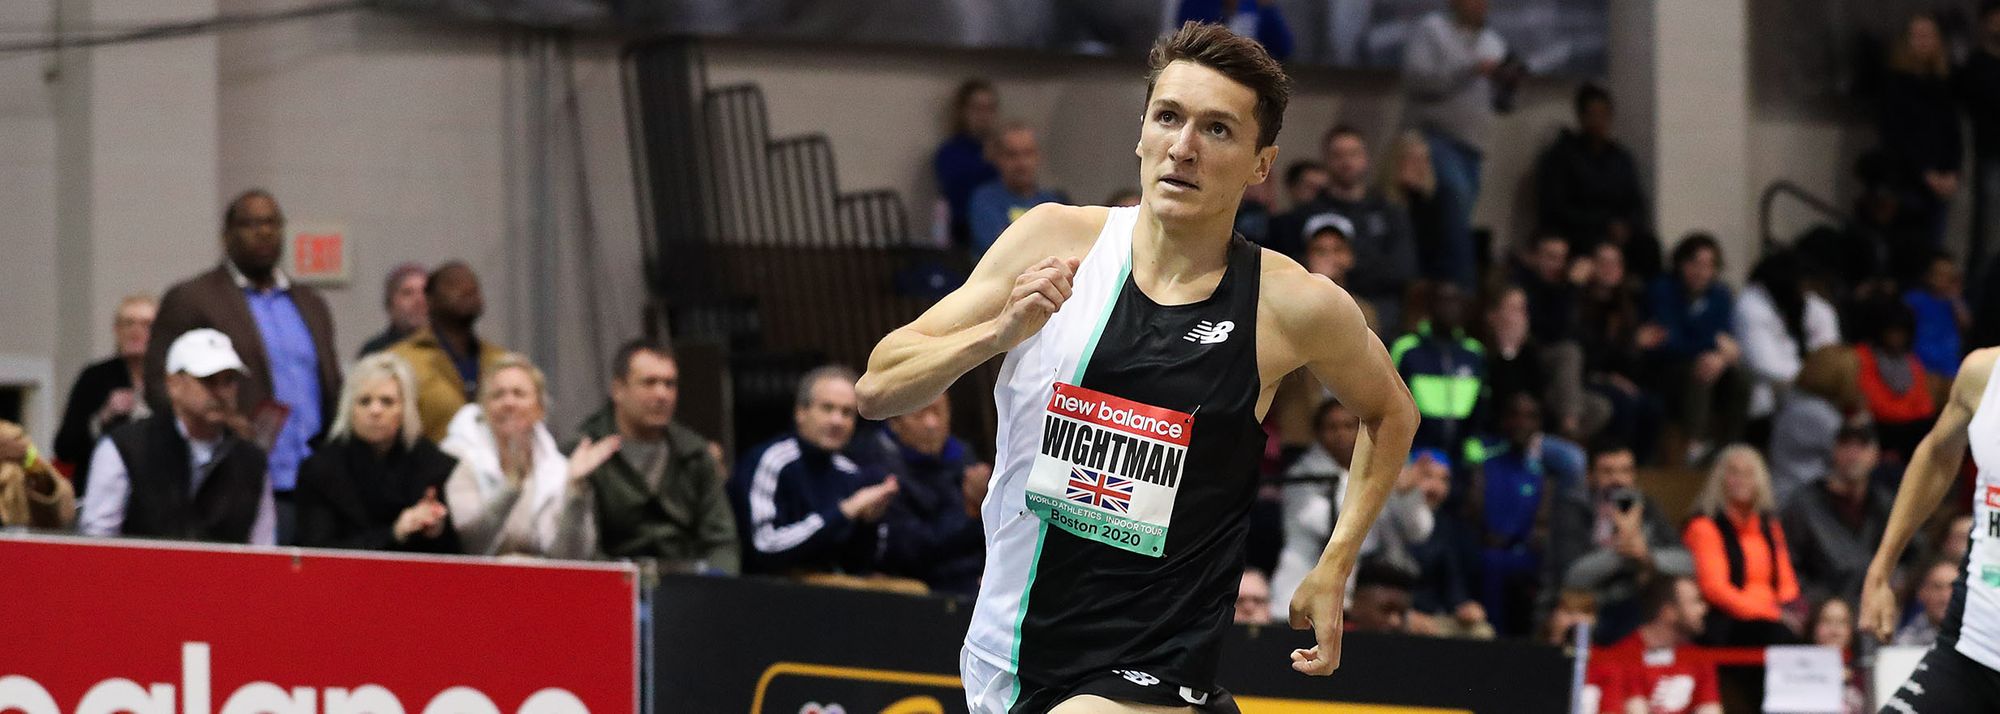 Britain’s 2022 world 1500m champion Jake Wightman will continue his comeback after injury by competing at the Maurie Plant Meet in February